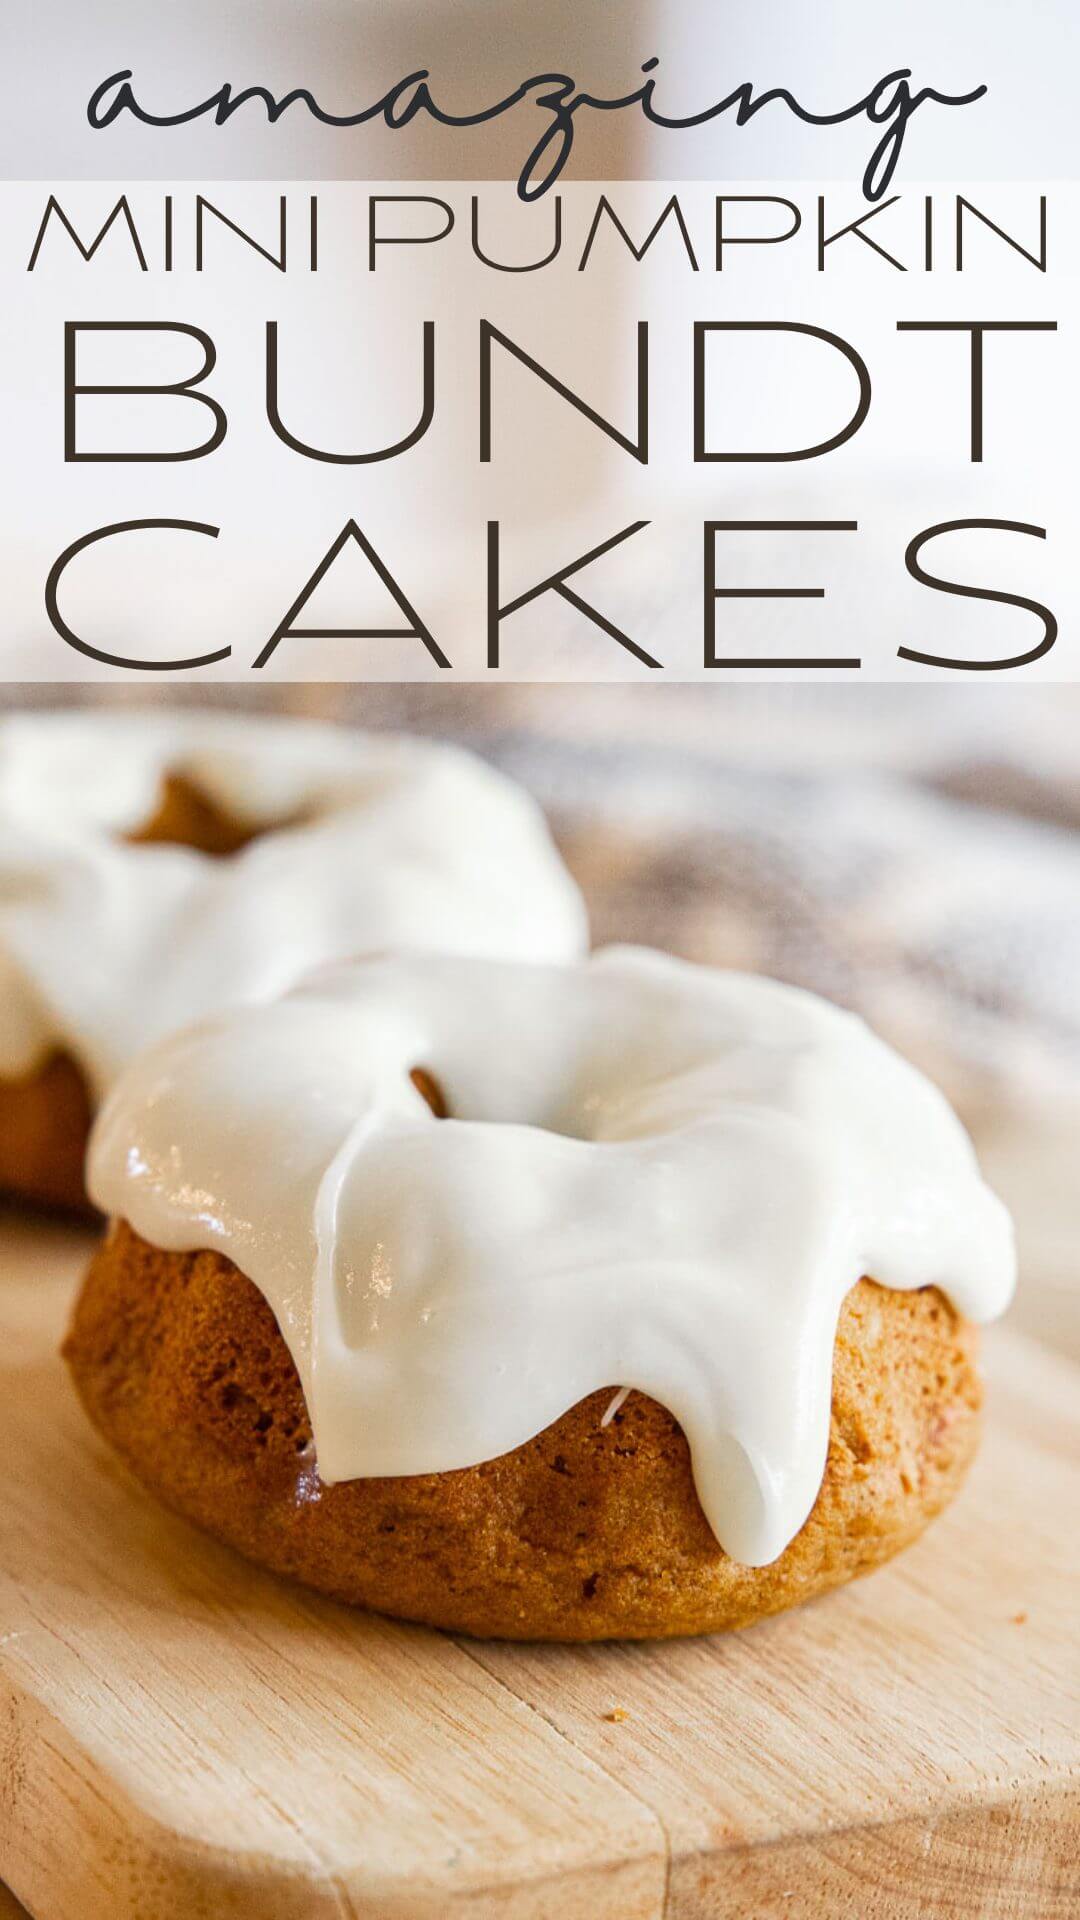 Make this amazing pumpkin bundt cake or make mini pumpkin bundt cakes. This is a moist and flavorful cake perfect for fall.